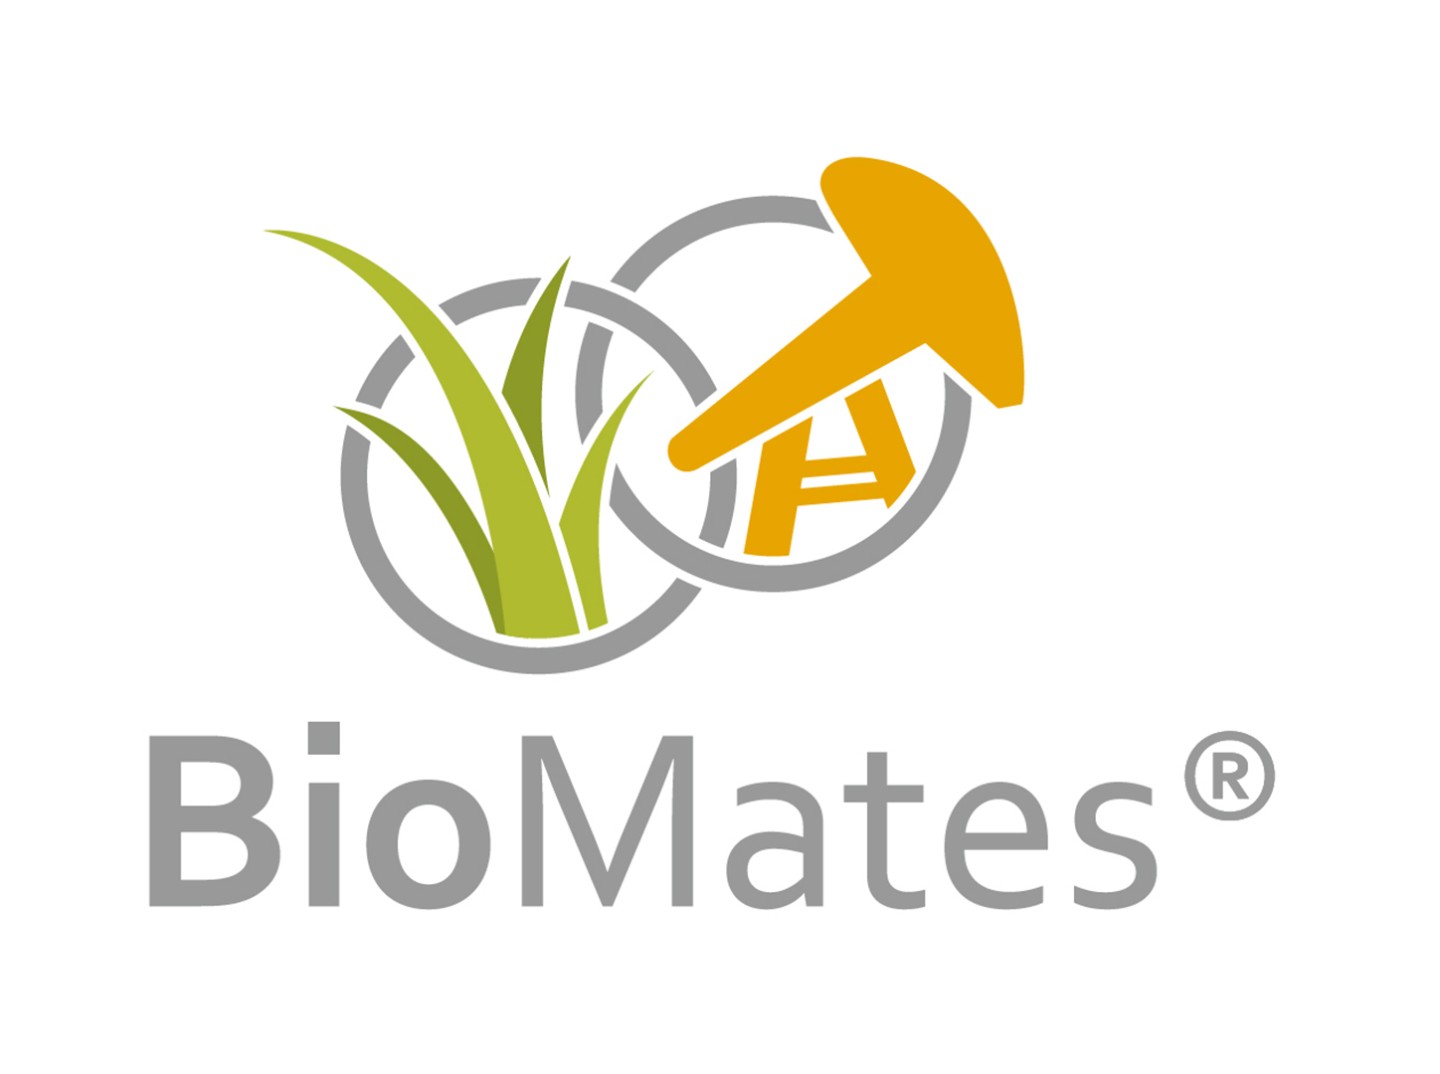 Within the framework of BioMates, a process is to be established with which renewable raw materials can be processed on a large scale in refineries instead of crude oil.